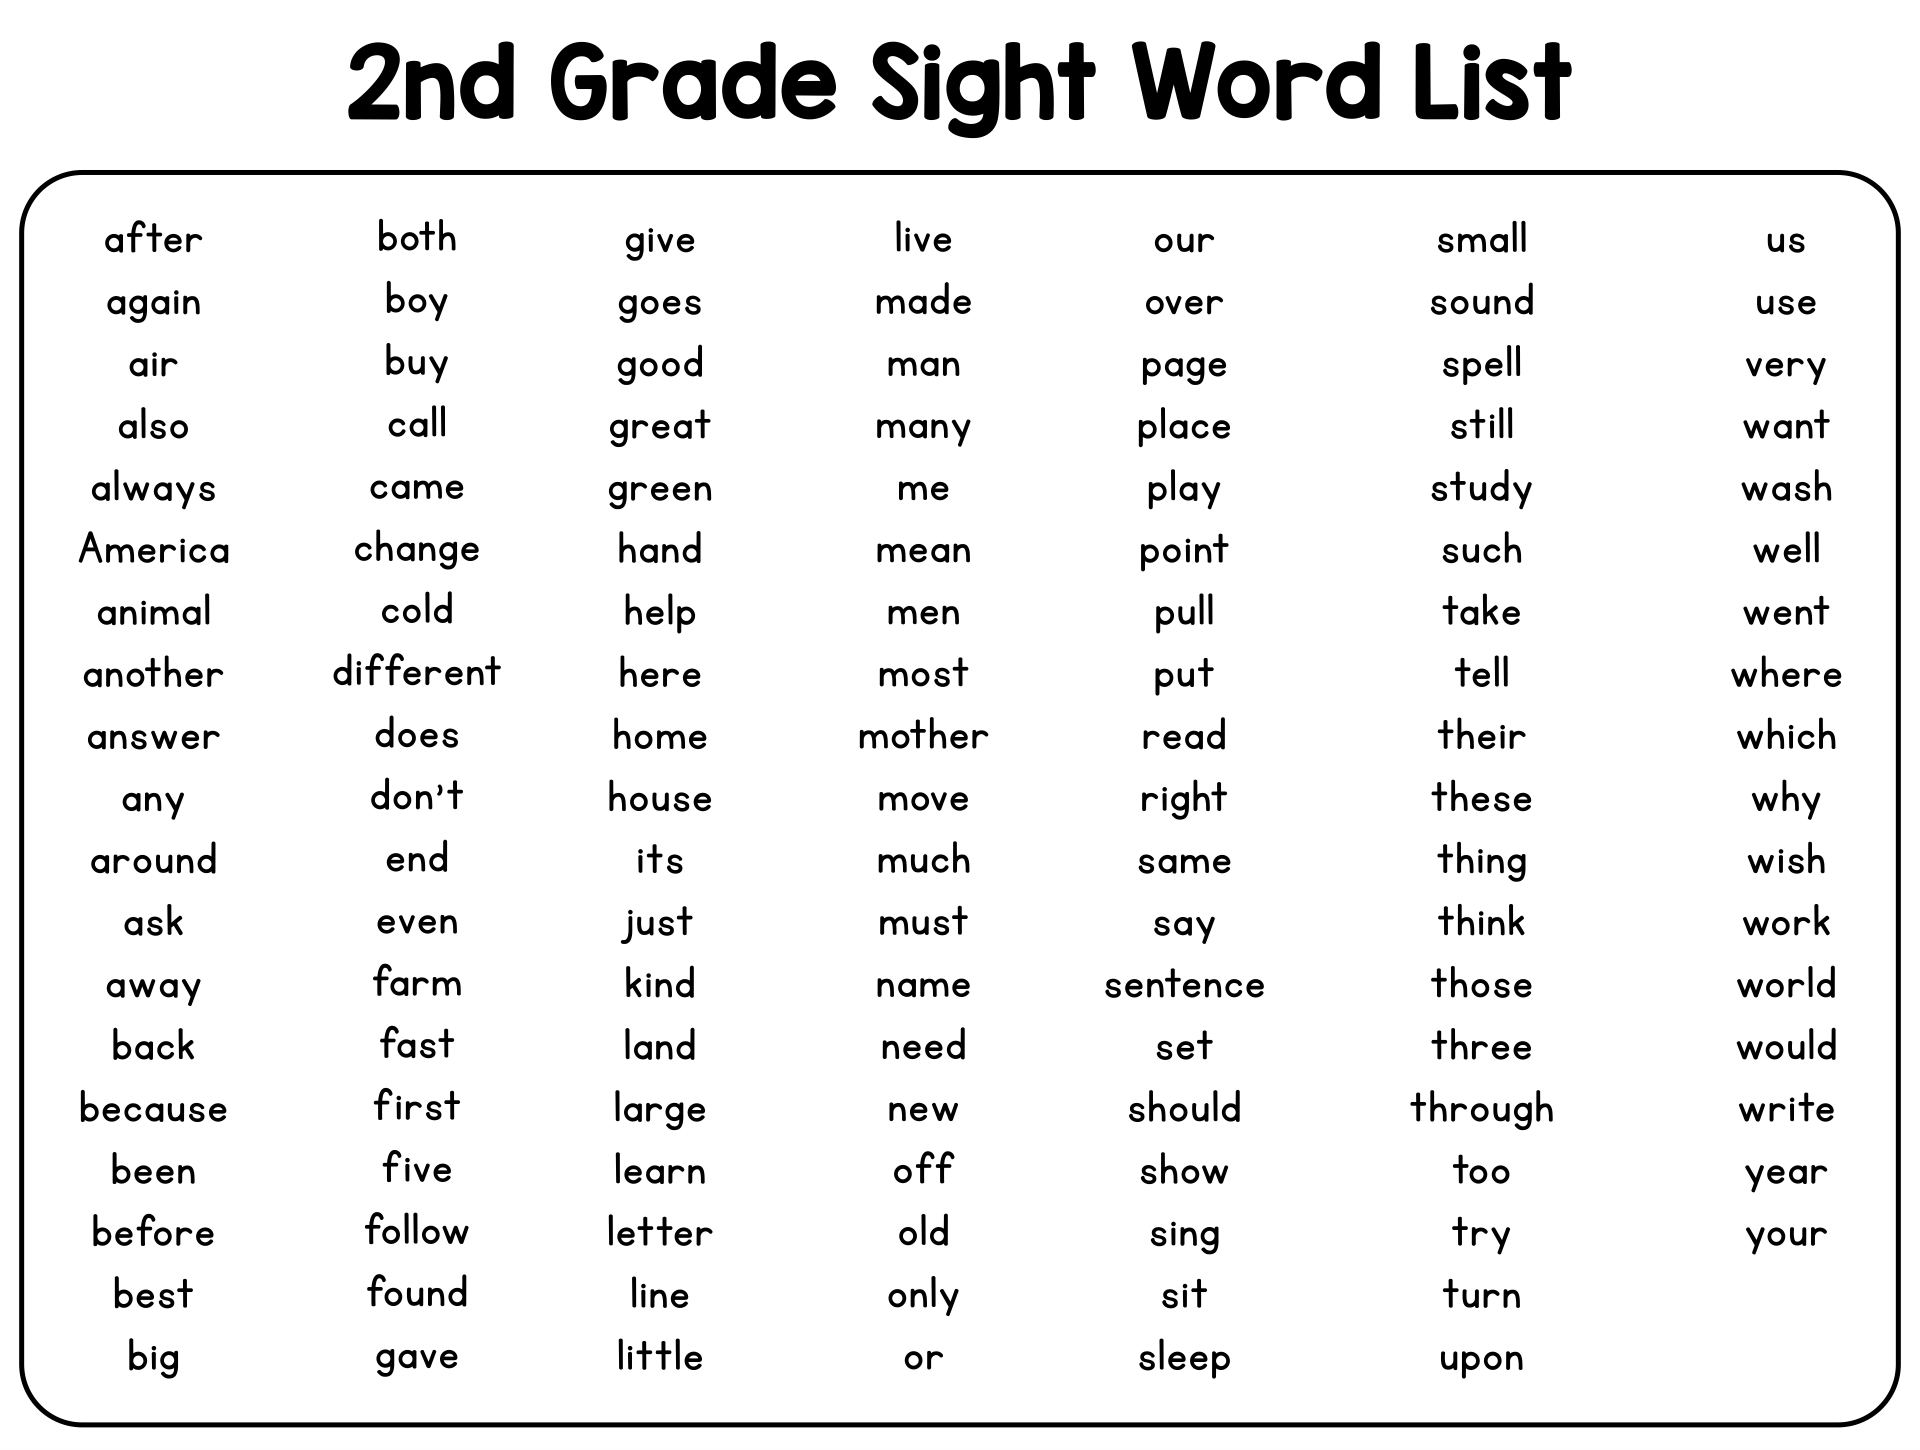 11 Best Second Grade Sight Words Printable - printablee.com Inside 2nd Grade Sight Words Worksheet